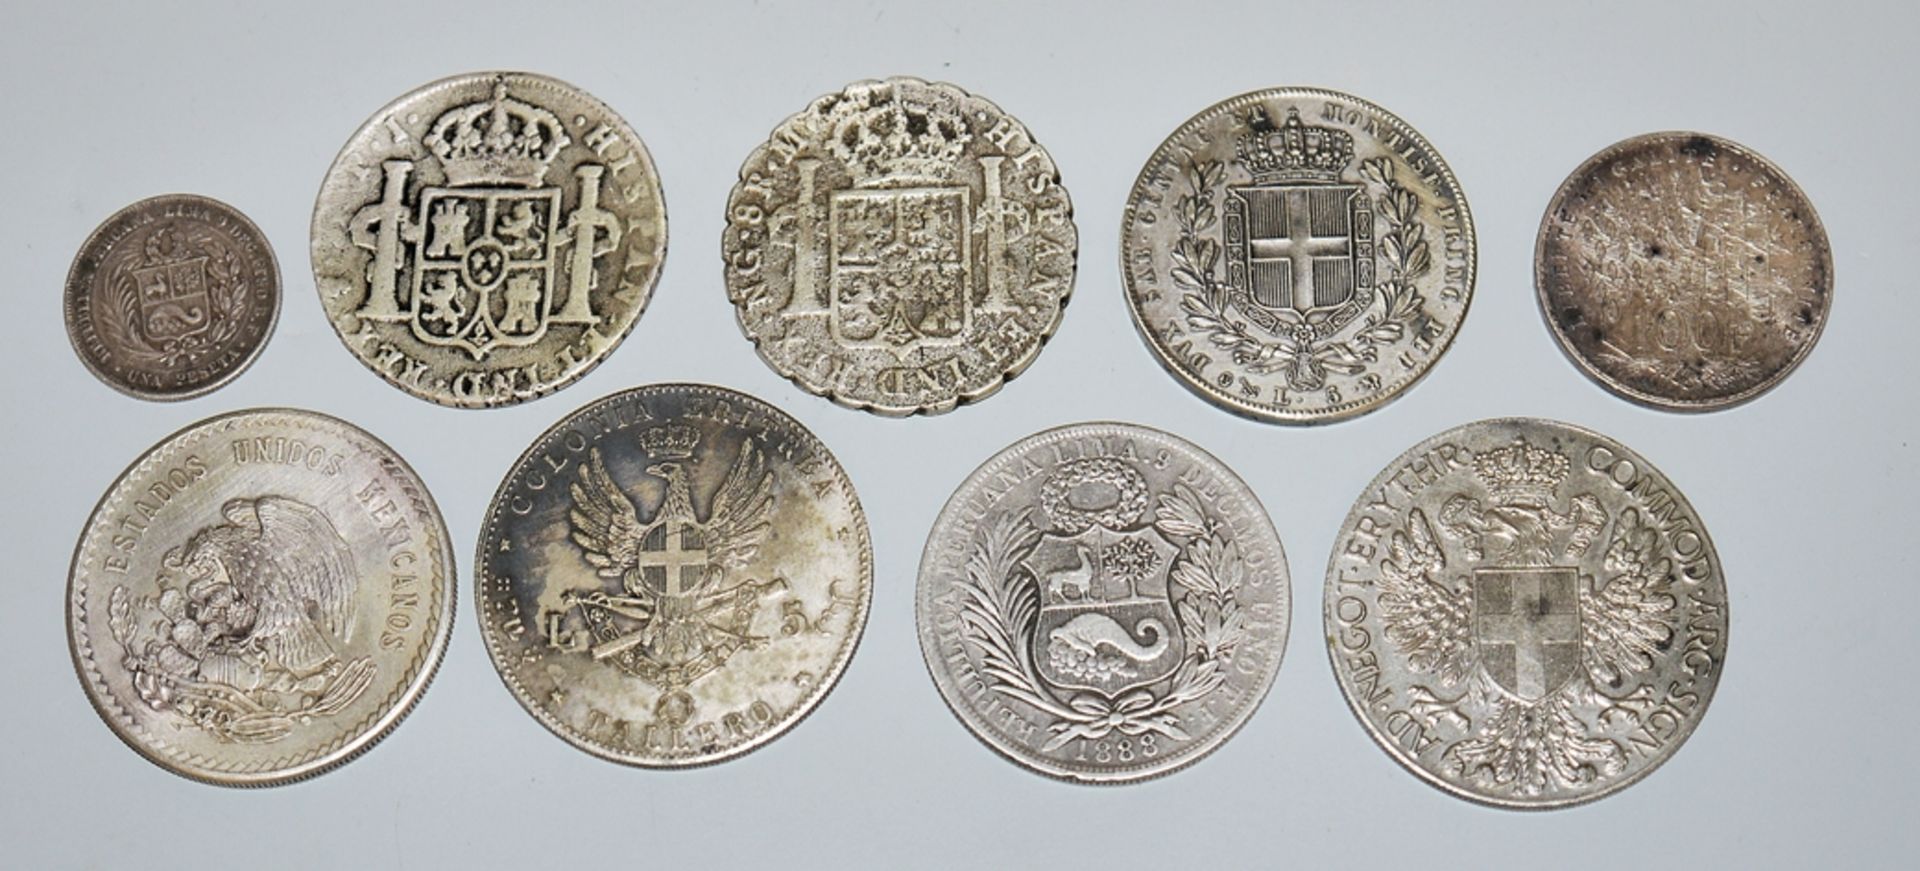 8 silver coins 19th/20th cent. - Image 2 of 2